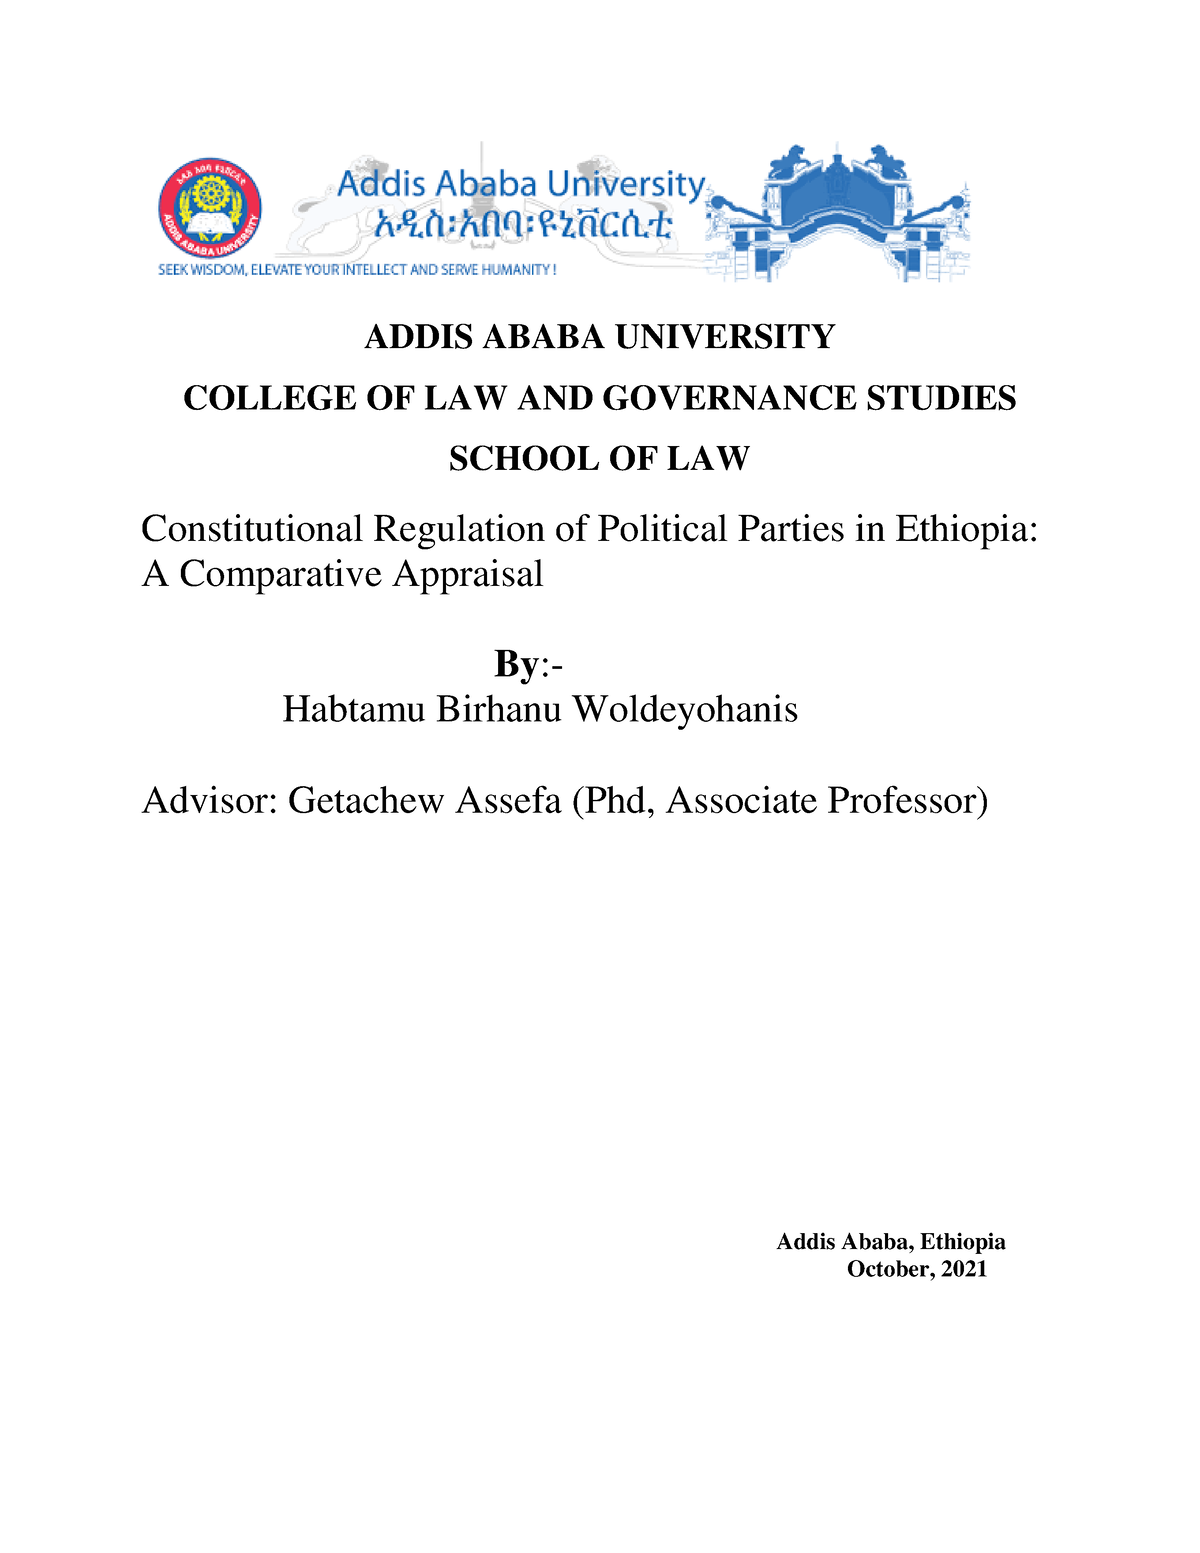 thesis done in addis ababa university